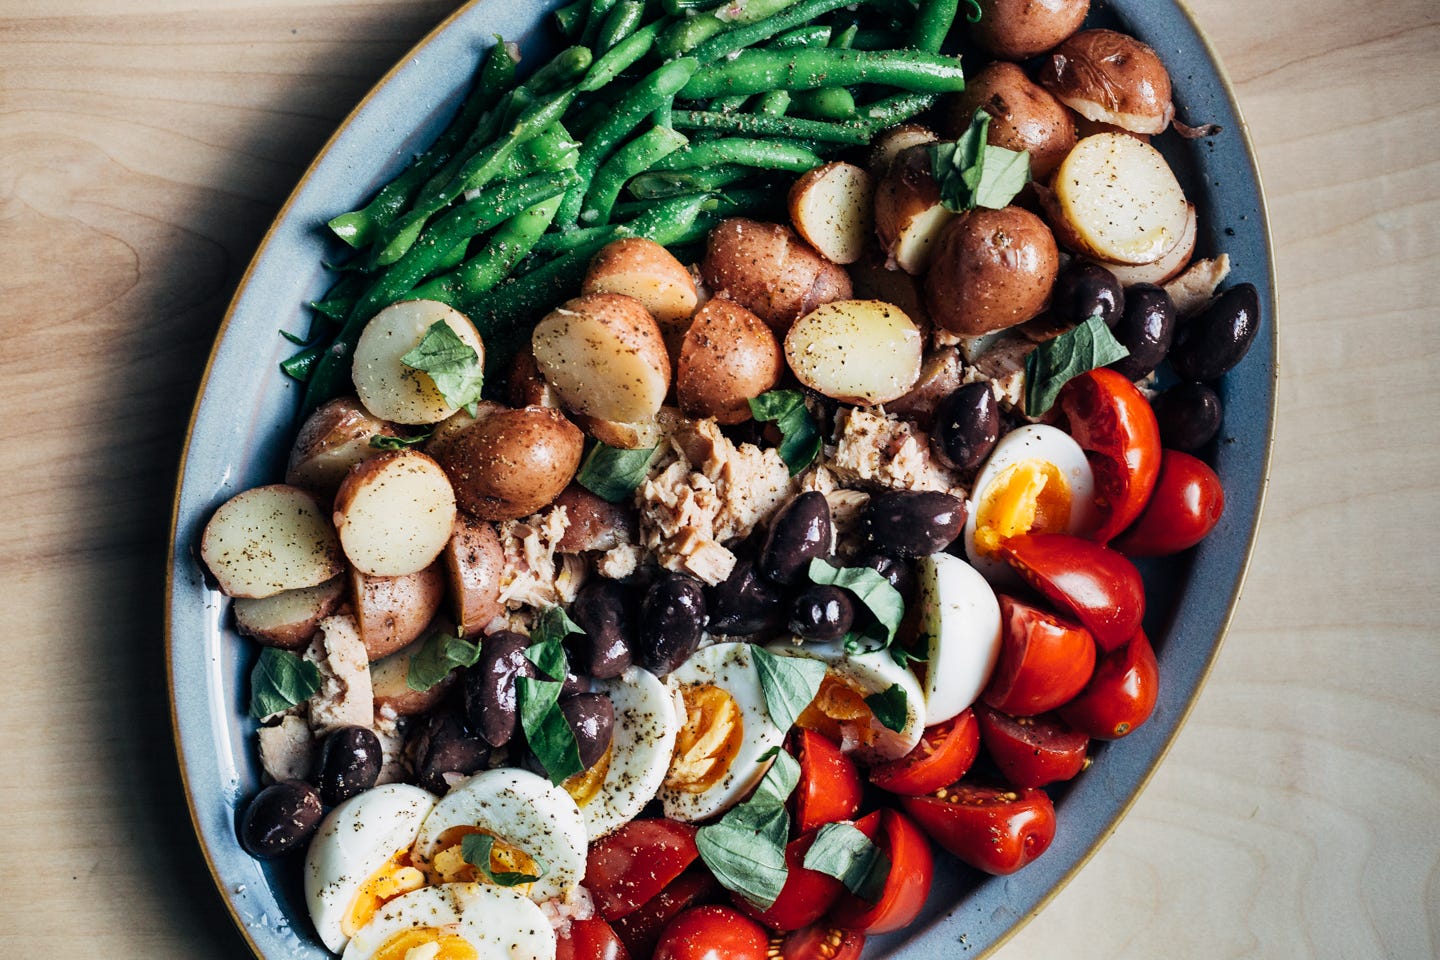 A platter with a variation on salad nicoise, including green beans, potatoes, tuna, olives, eggs, and tomatoes.